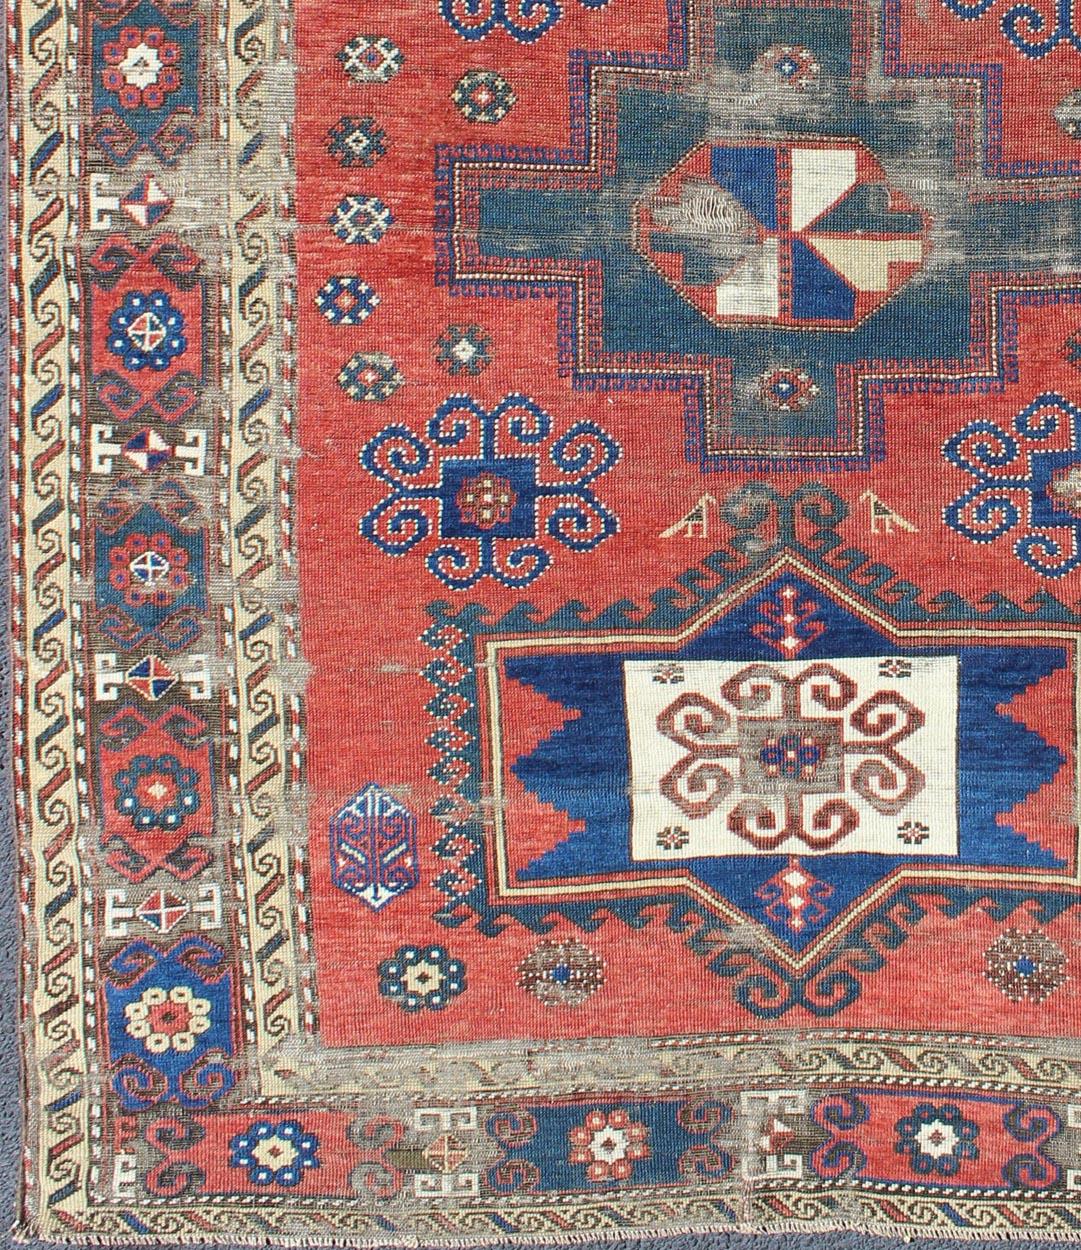 Blue and red Kazak antique rug from Caucasus with Geometric motifs, rug gng-4755, country of origin / type: Iran / Caucasian Kazak, circa 1900.

Kazak rugs are among the most desirable Caucasian rugs. The vibrant reds, blues, and ivories that